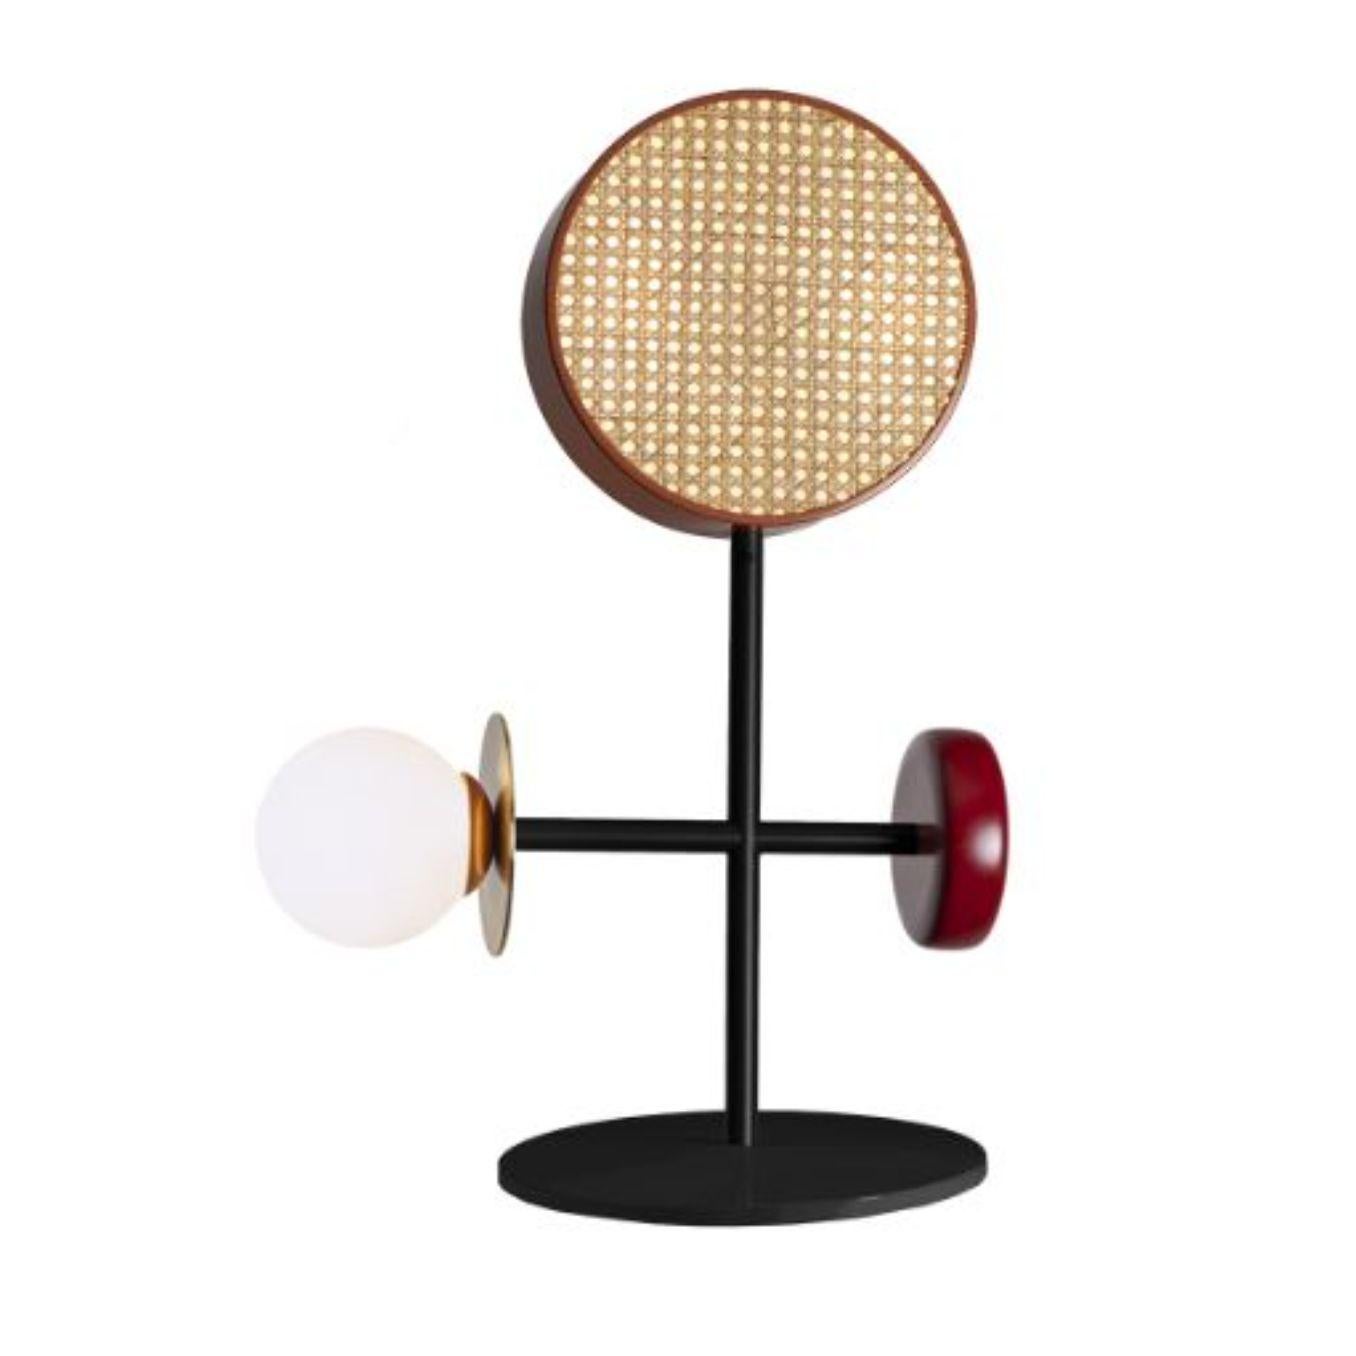 Monaco table I lamp by Dooq
Dimensions: W 45 x D 45 x H 65 cm
Materials: lacquered metal, brass/nickel, rattan and wood spheres.

Information:
230V/50Hz
3 x max. G9
4W LED

120V/60Hz
3 x max. G9
4W LED

Cable: 59”/1,5m

All our lamps